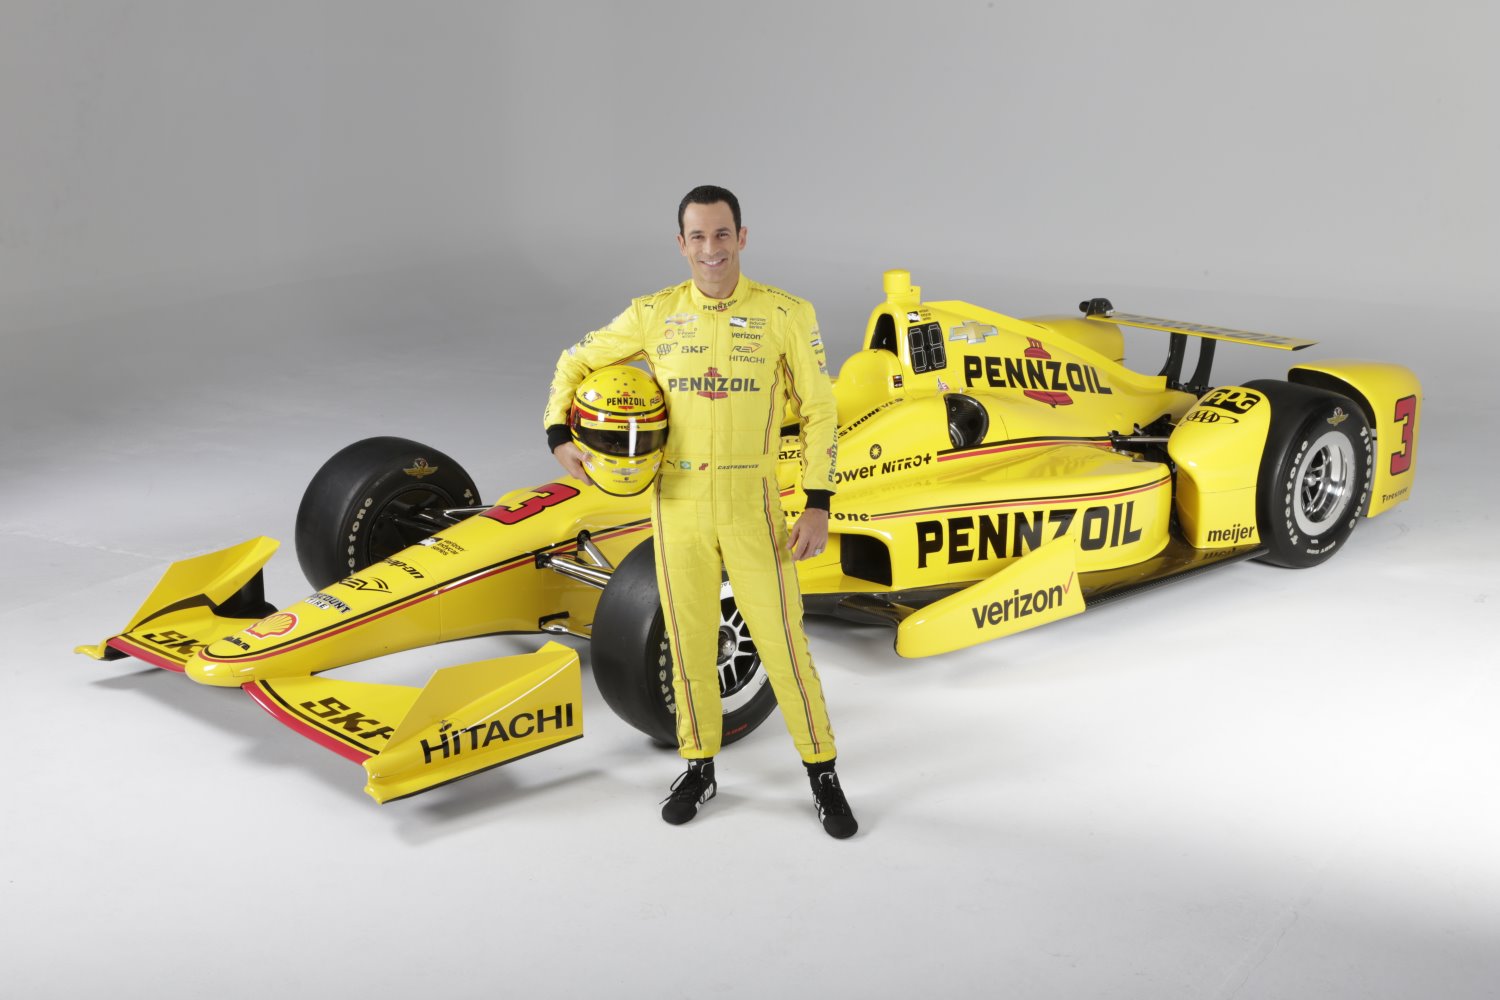 Castroneves and his Pennzoil car